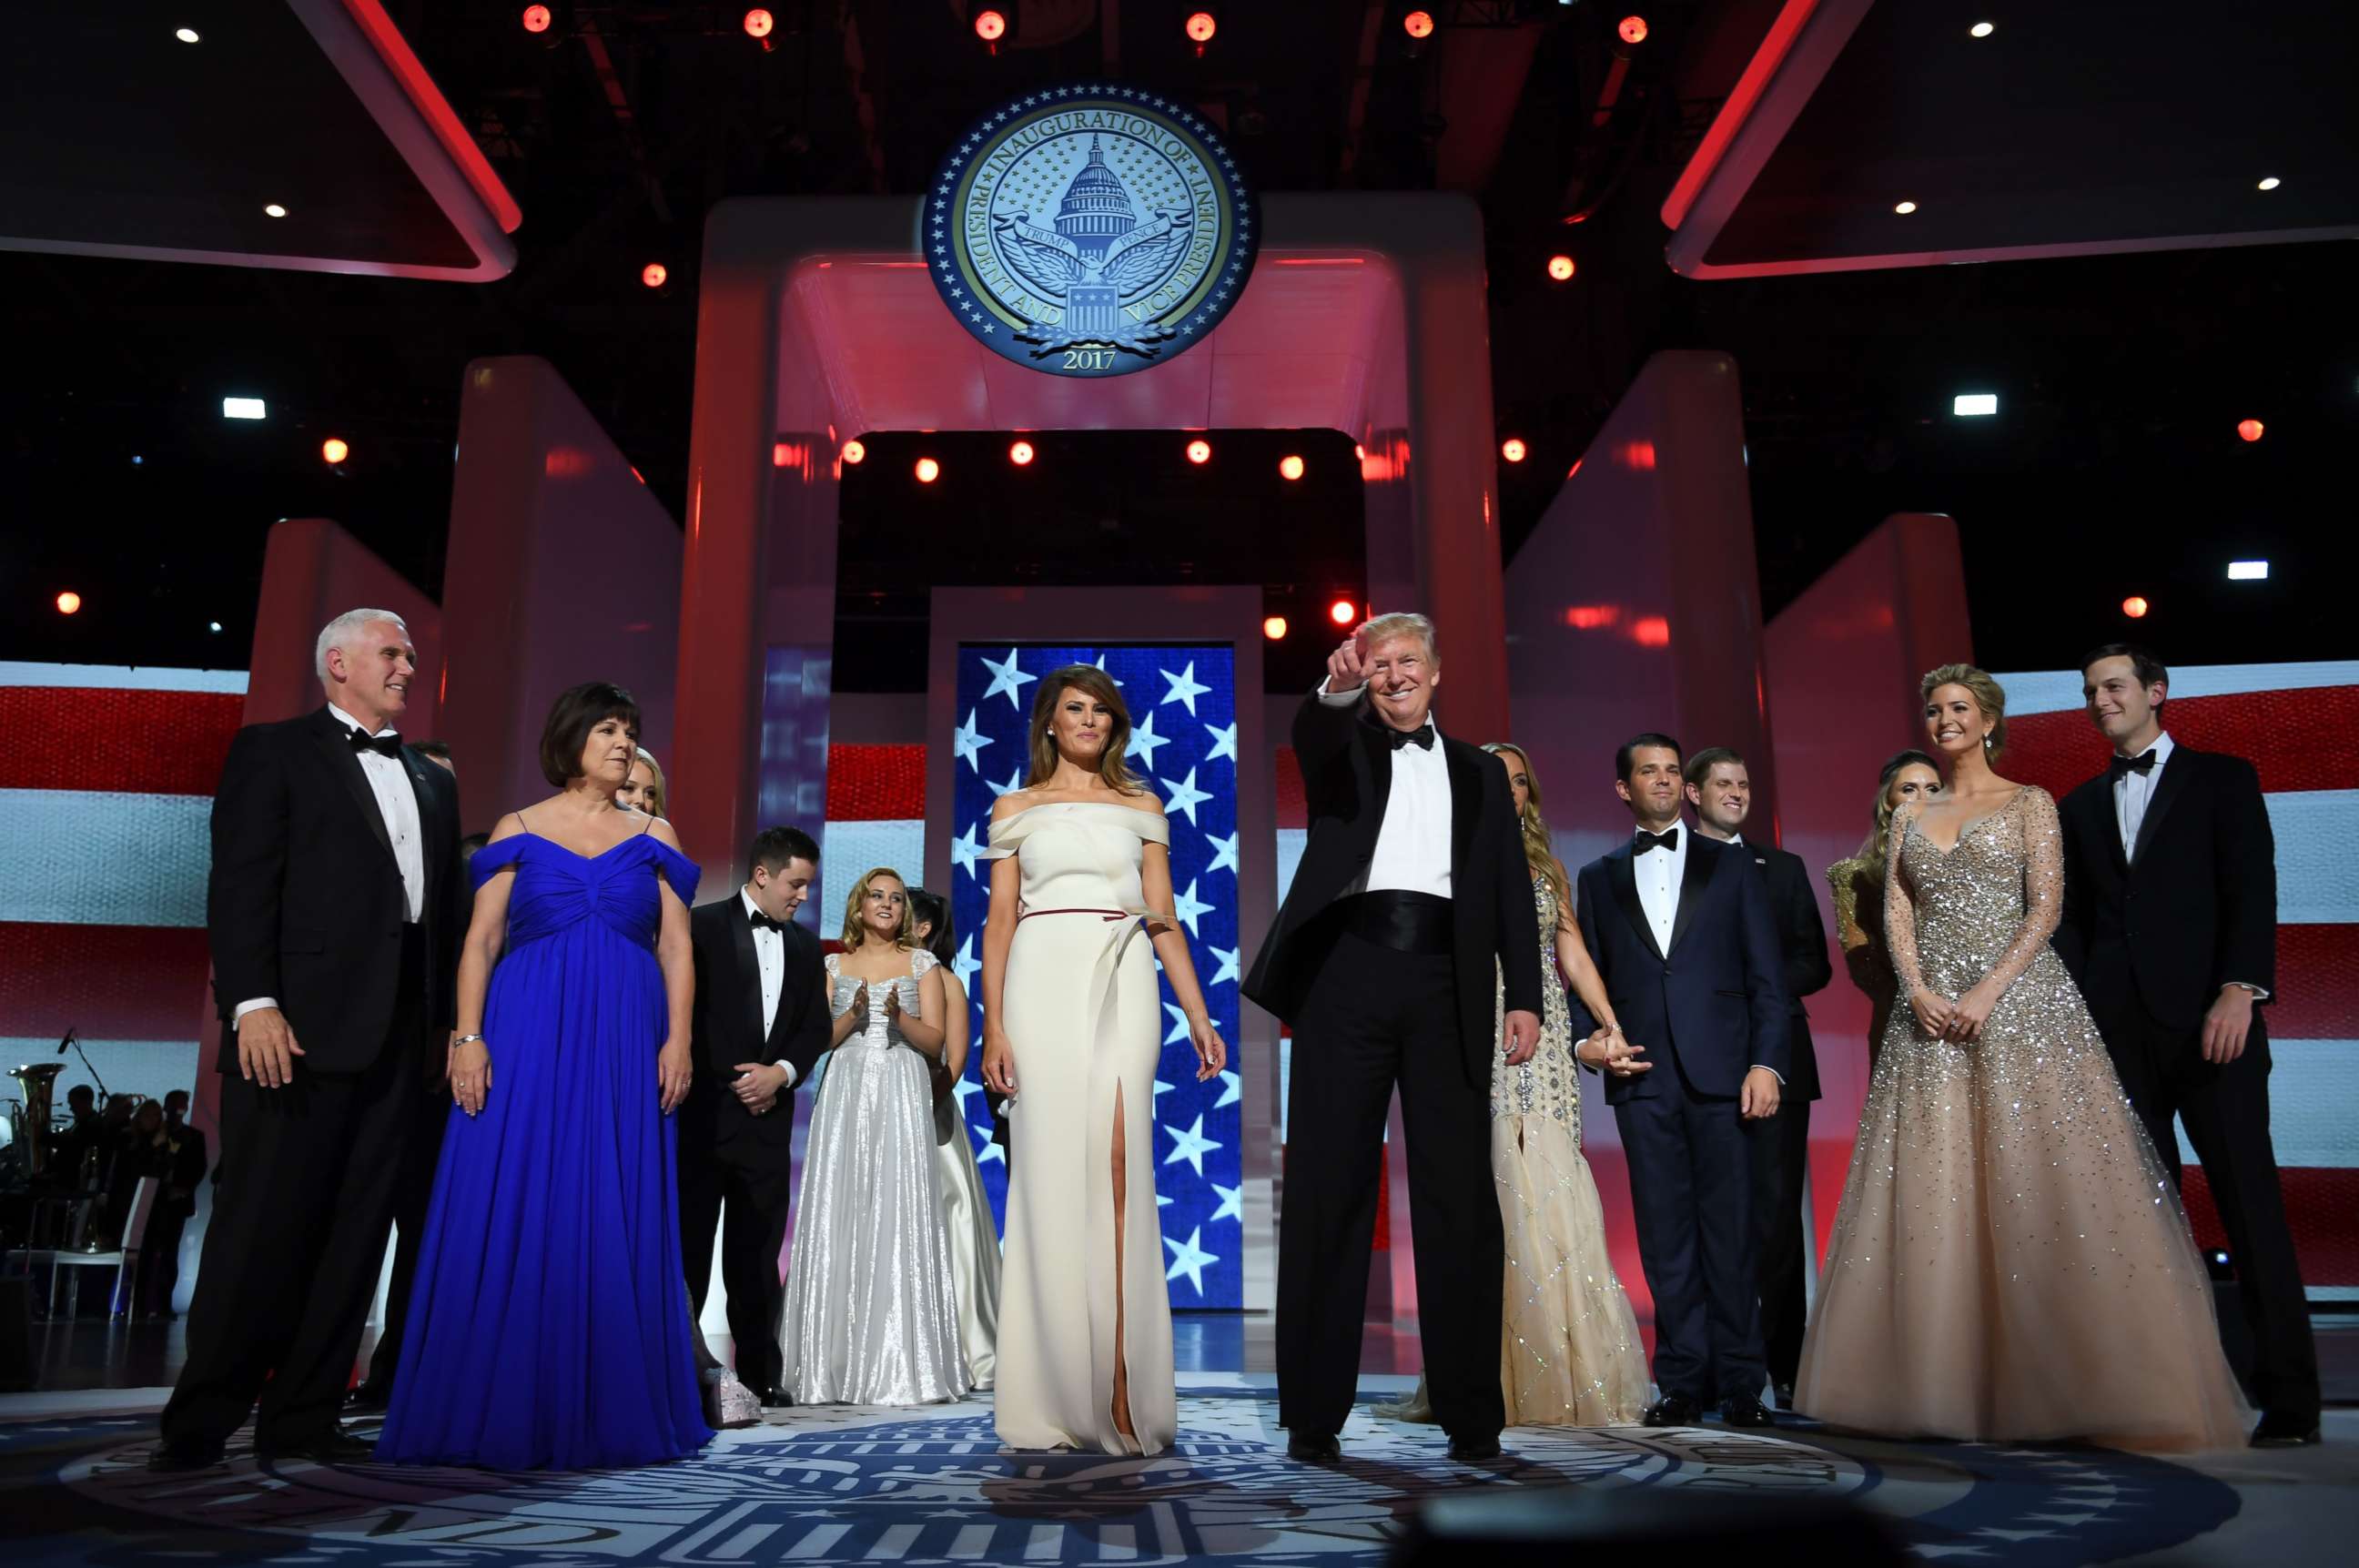 PHOTO: President Donald Trump with first lady Melania Trump and family at the Liberty Ball following Donald Trump's inauguration as the 45th President of the United States, in Washington, Jan. 20, 2017.
